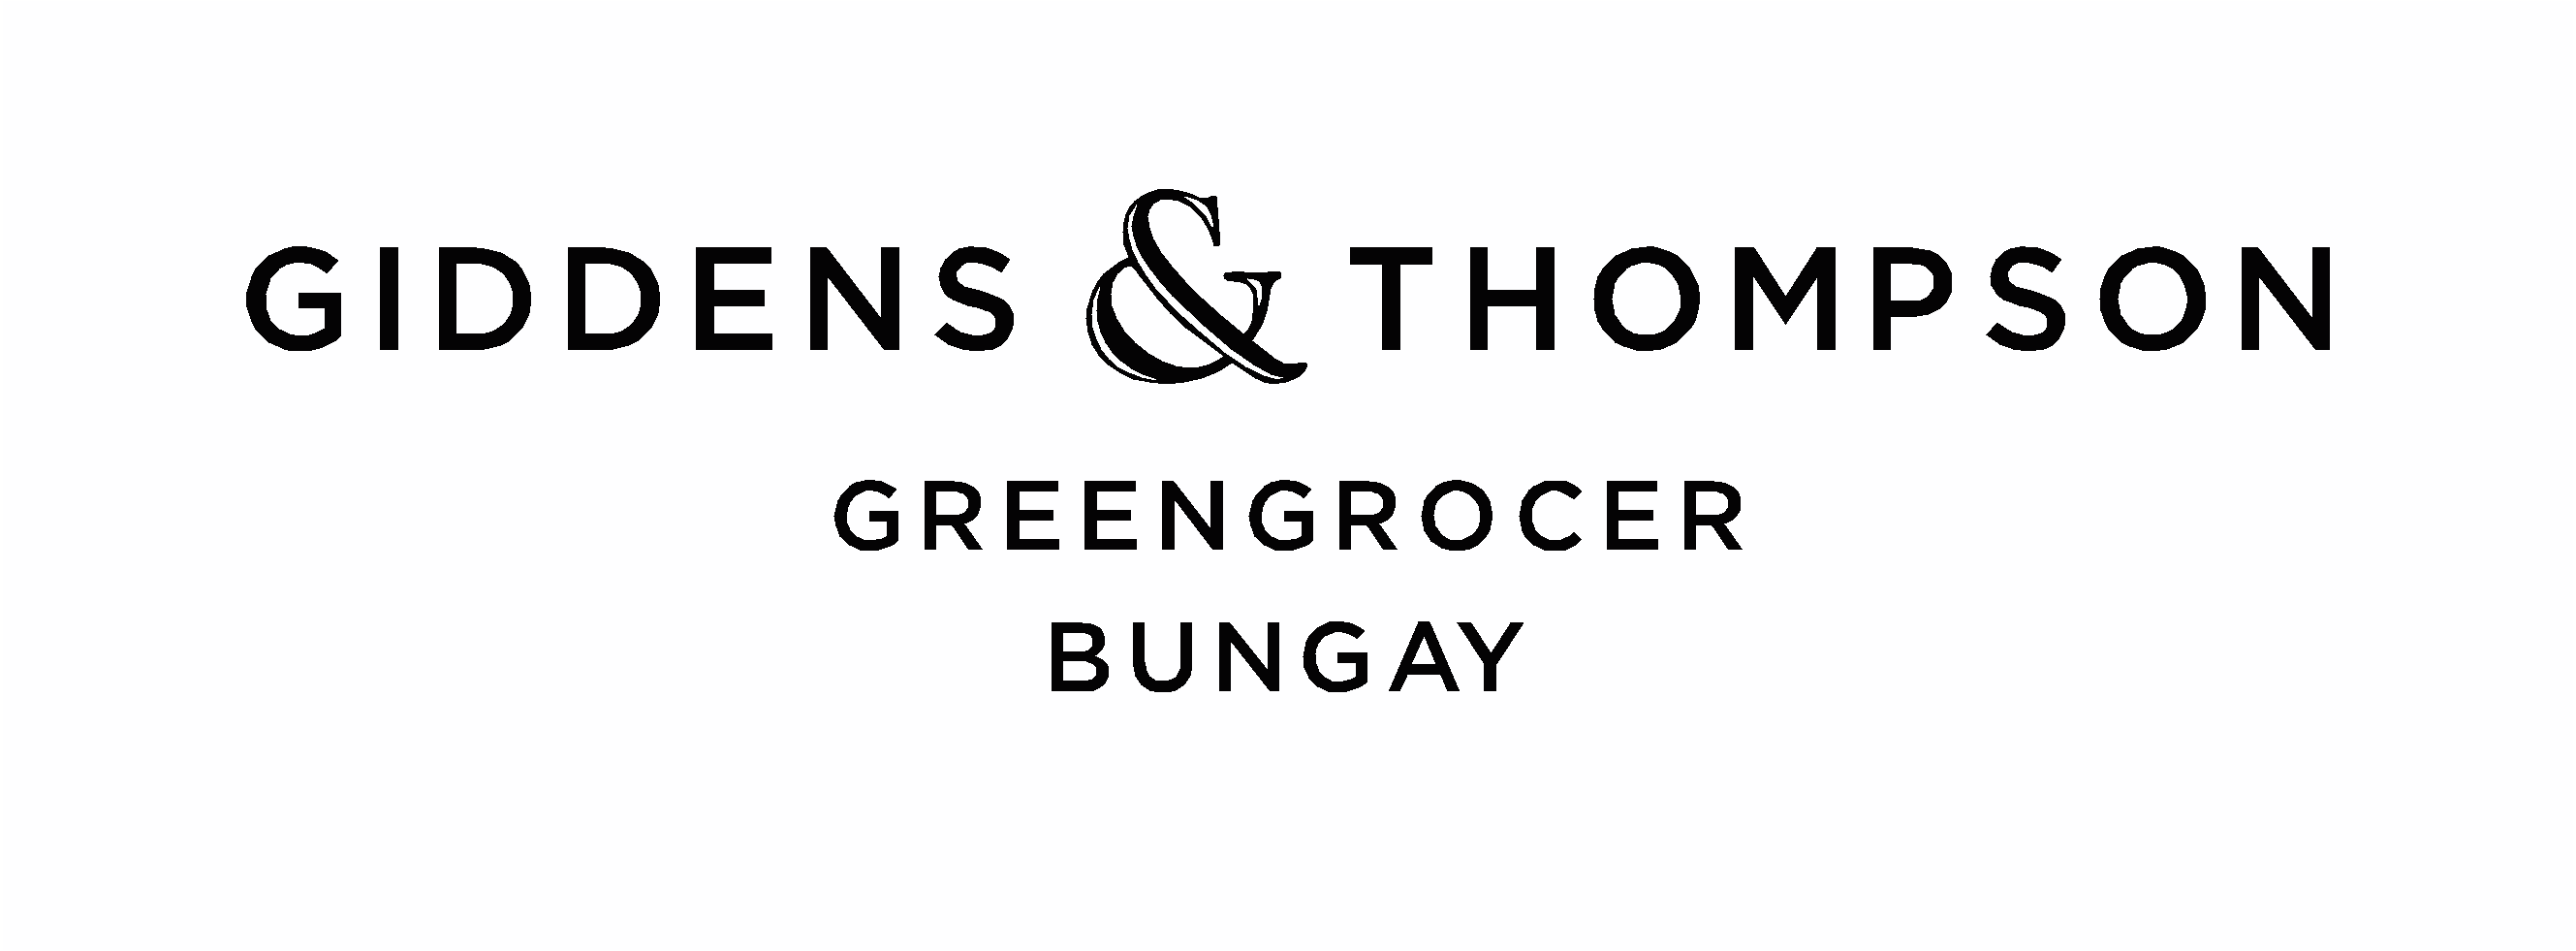 Giddens and Thompson Greengrocer